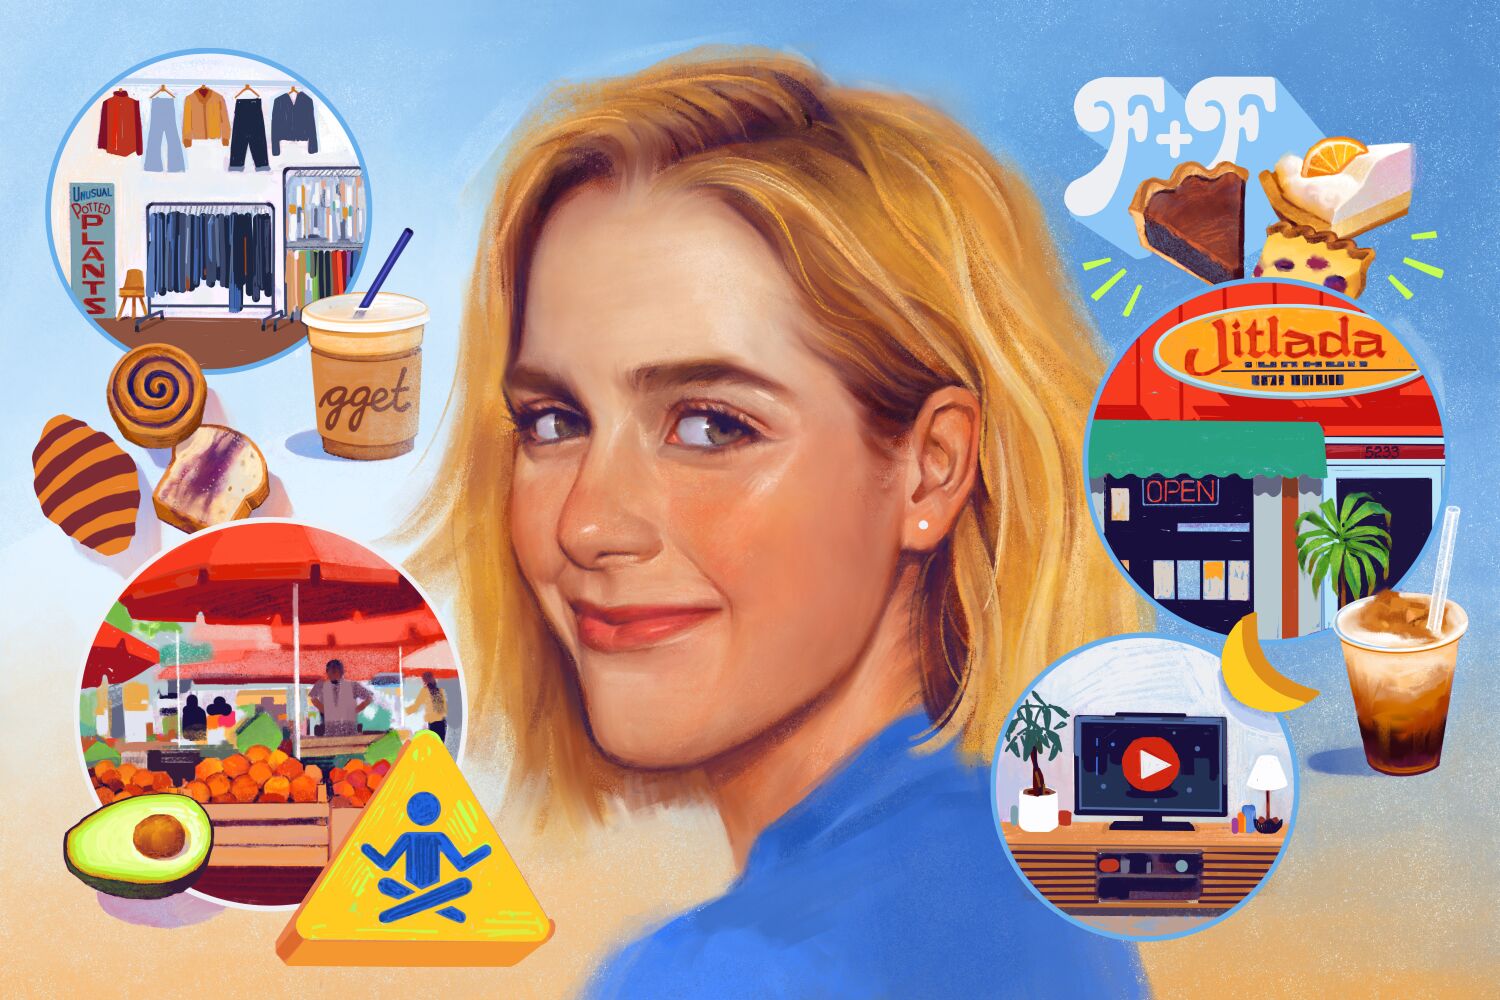 How to have the best Sunday in L.A., according to Kiernan Shipka